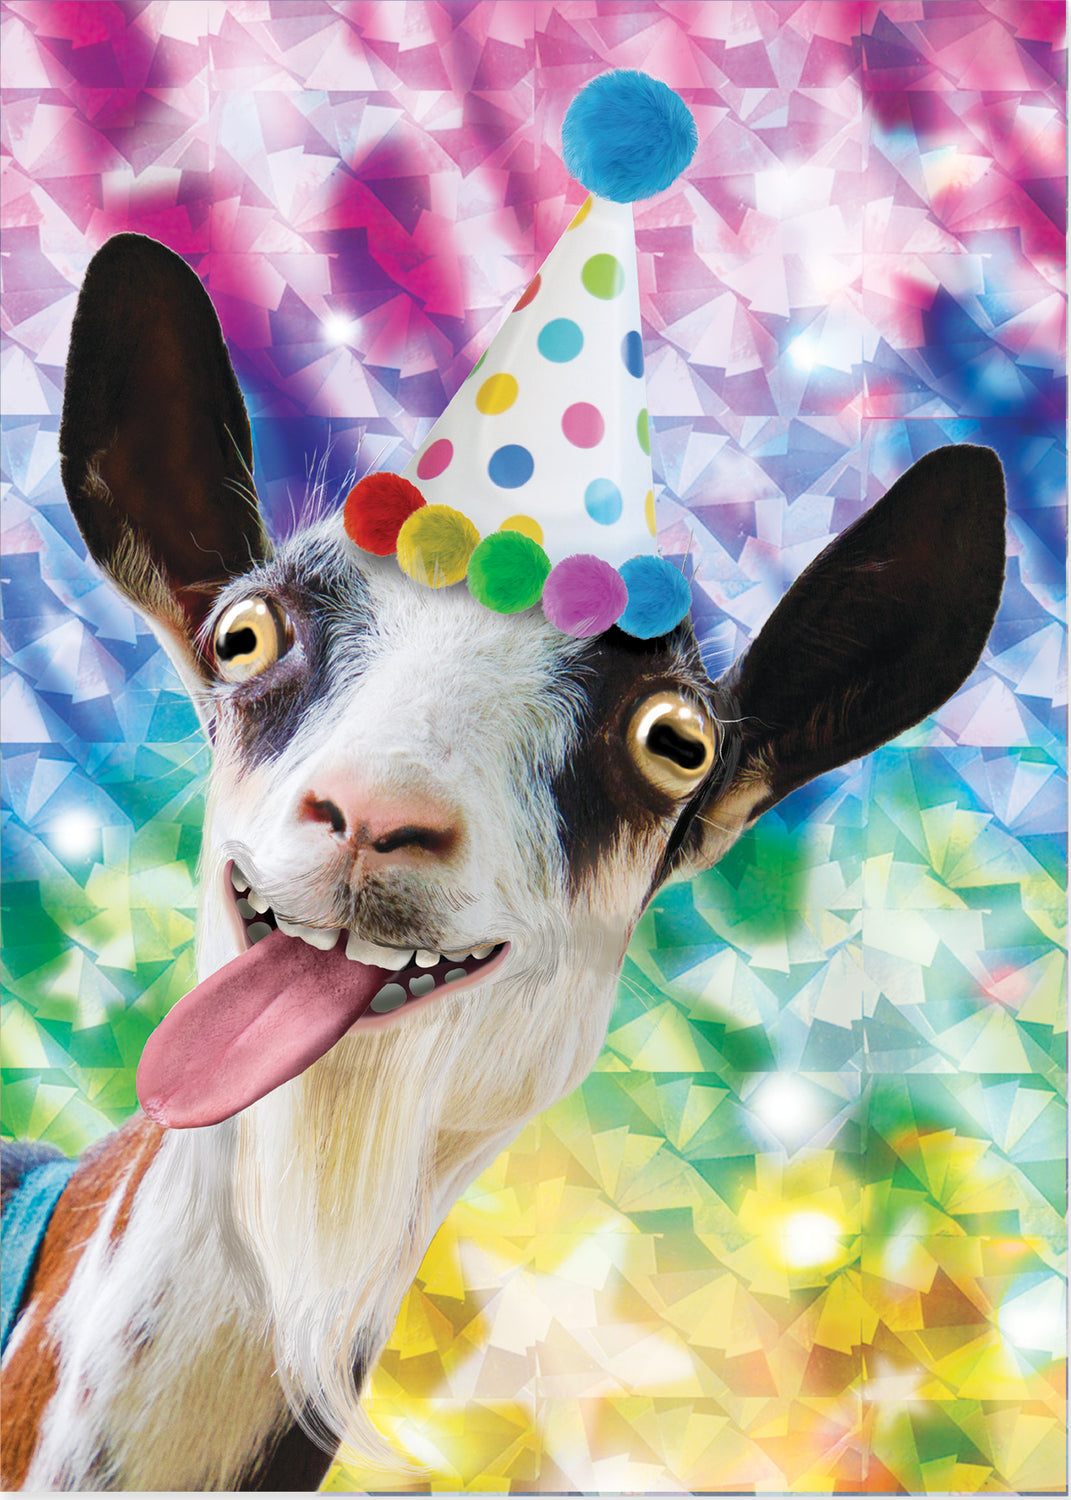 Foil: Hoping Your Birthday Is The G.O.A.T.! Card